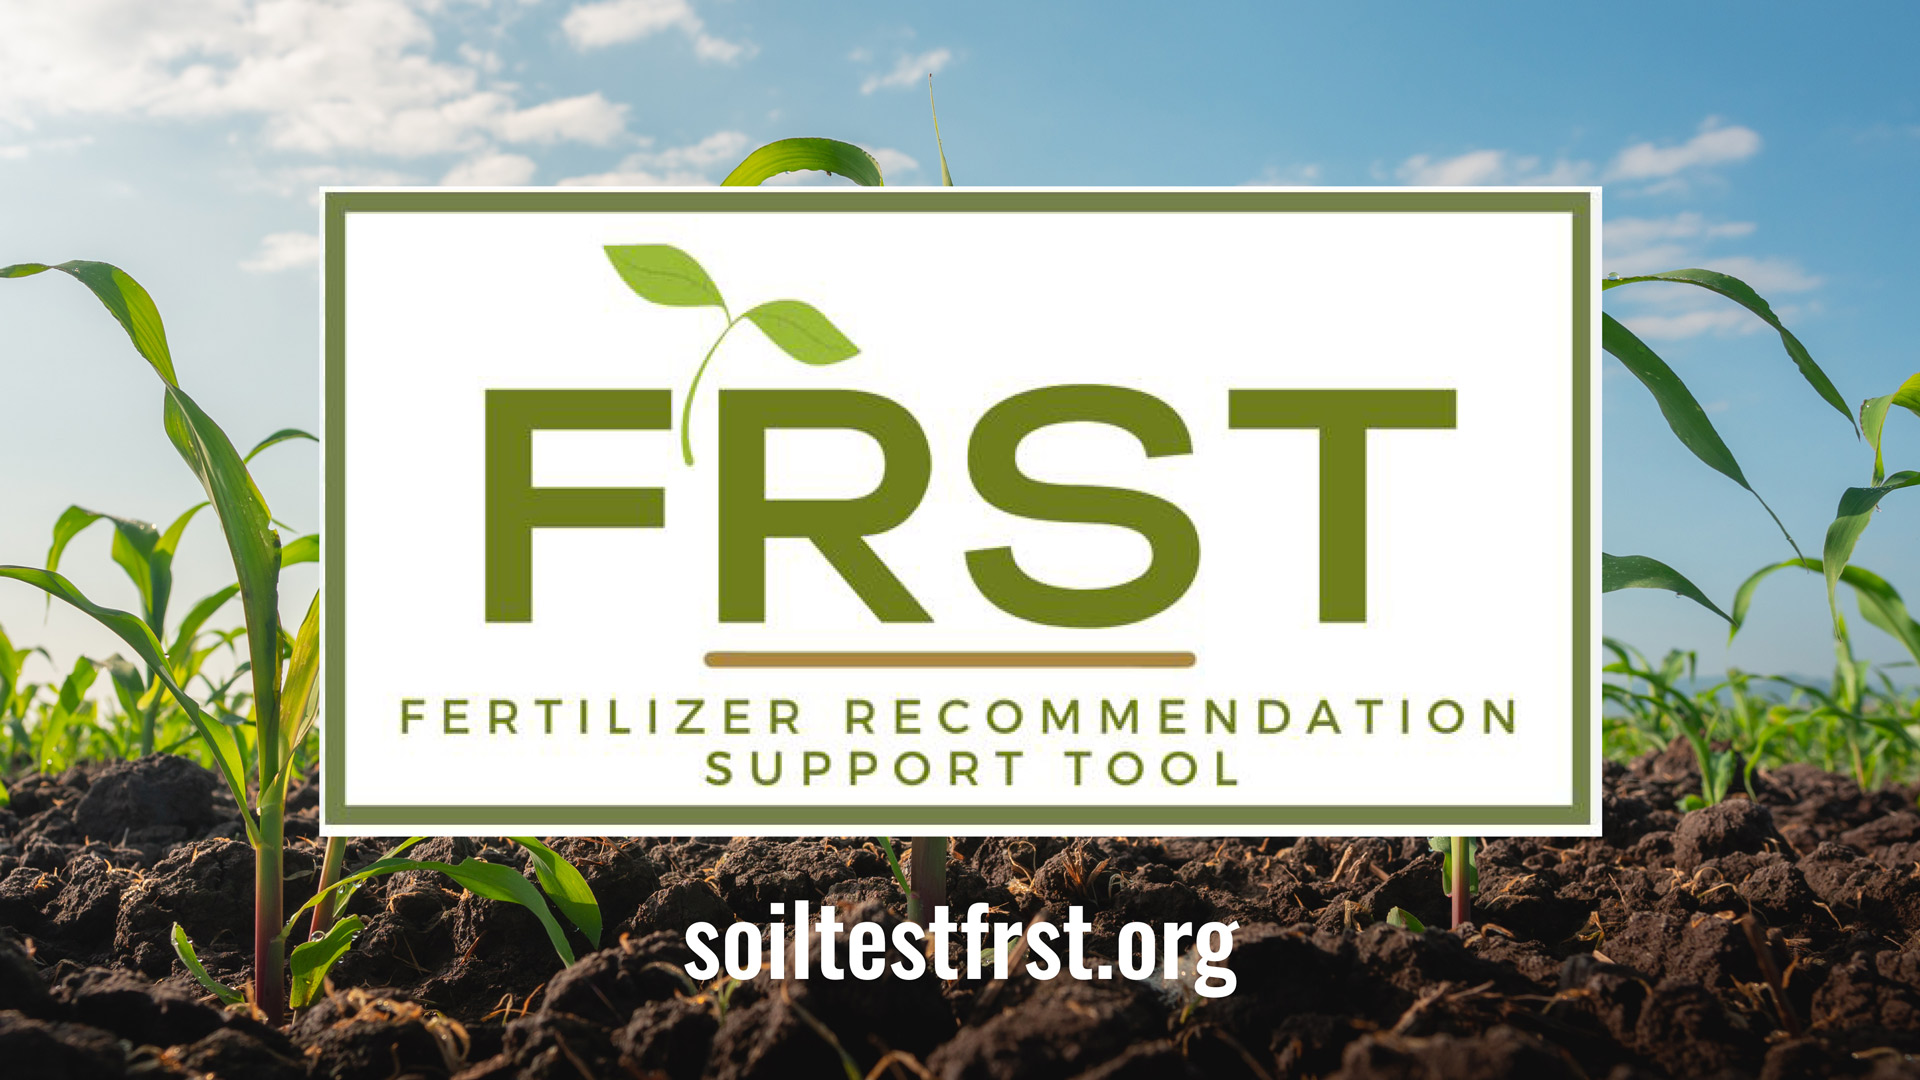 Fertilizer Recommendation Support Tool to Digitize Crop Nutrient Management Launches Nationwide